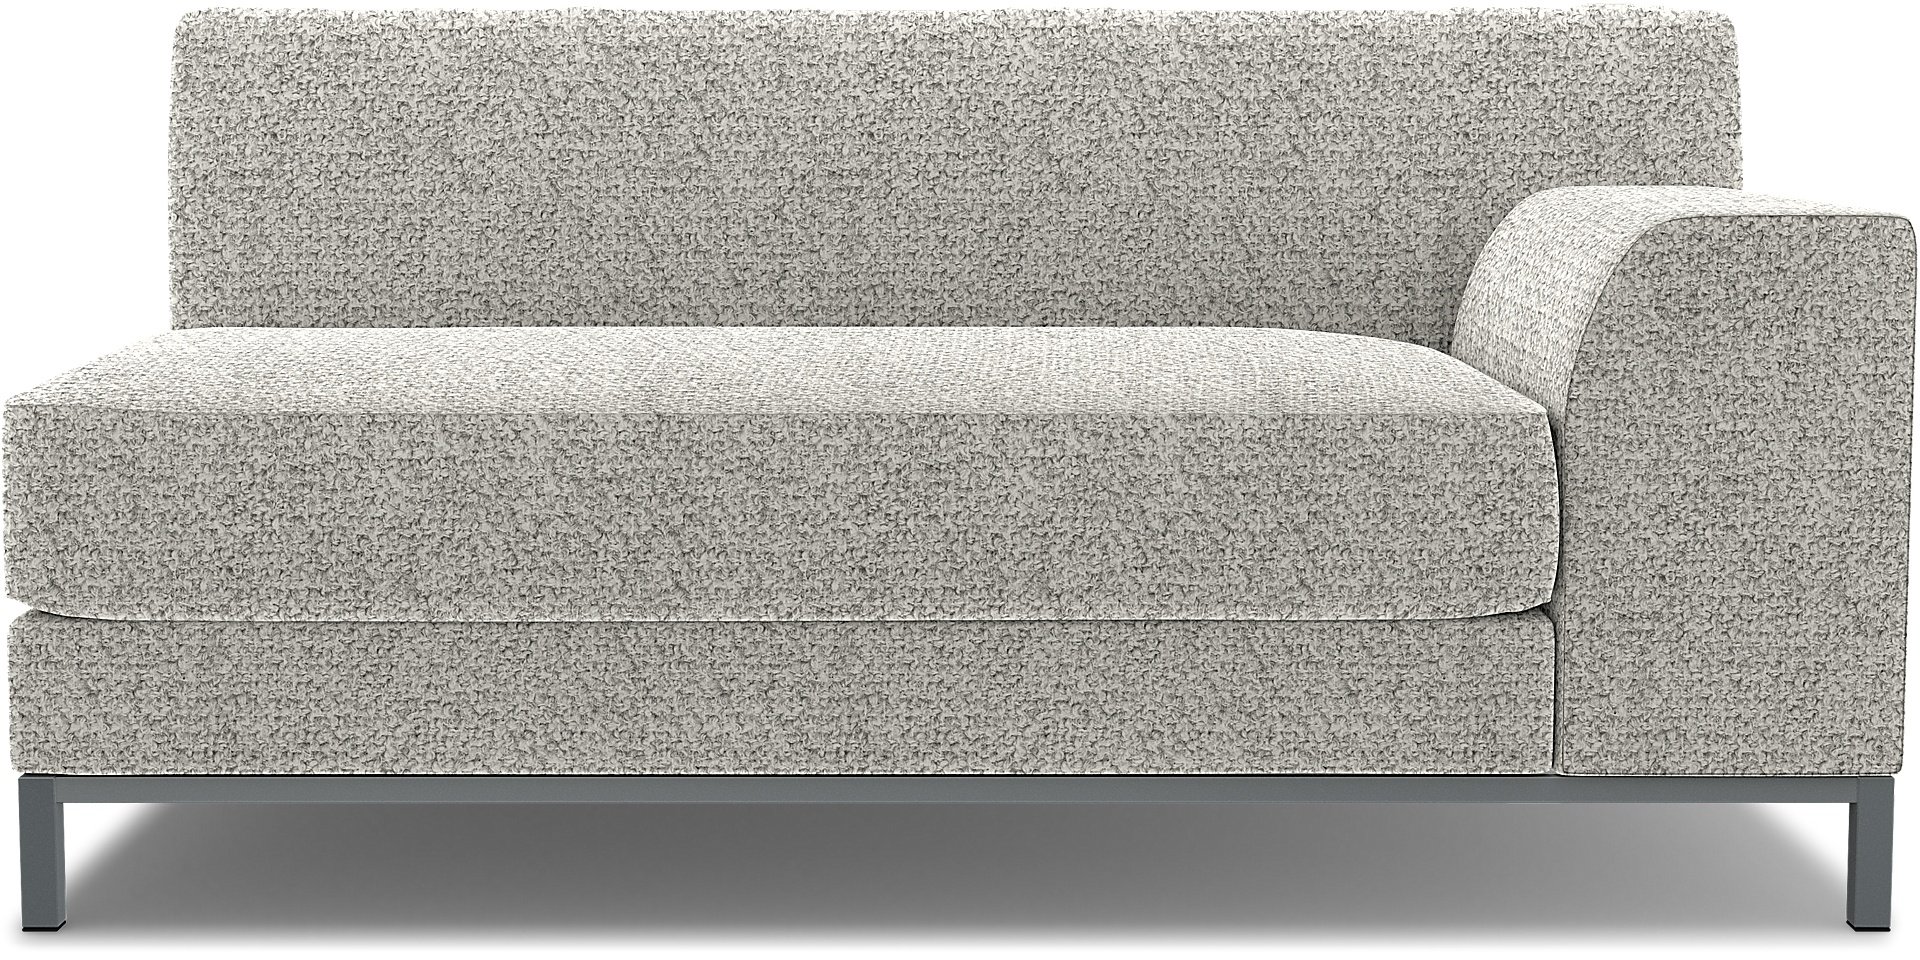 IKEA - Kramfors 2 Seater Sofa with Right Arm Cover, Driftwood, Boucle & Texture - Bemz